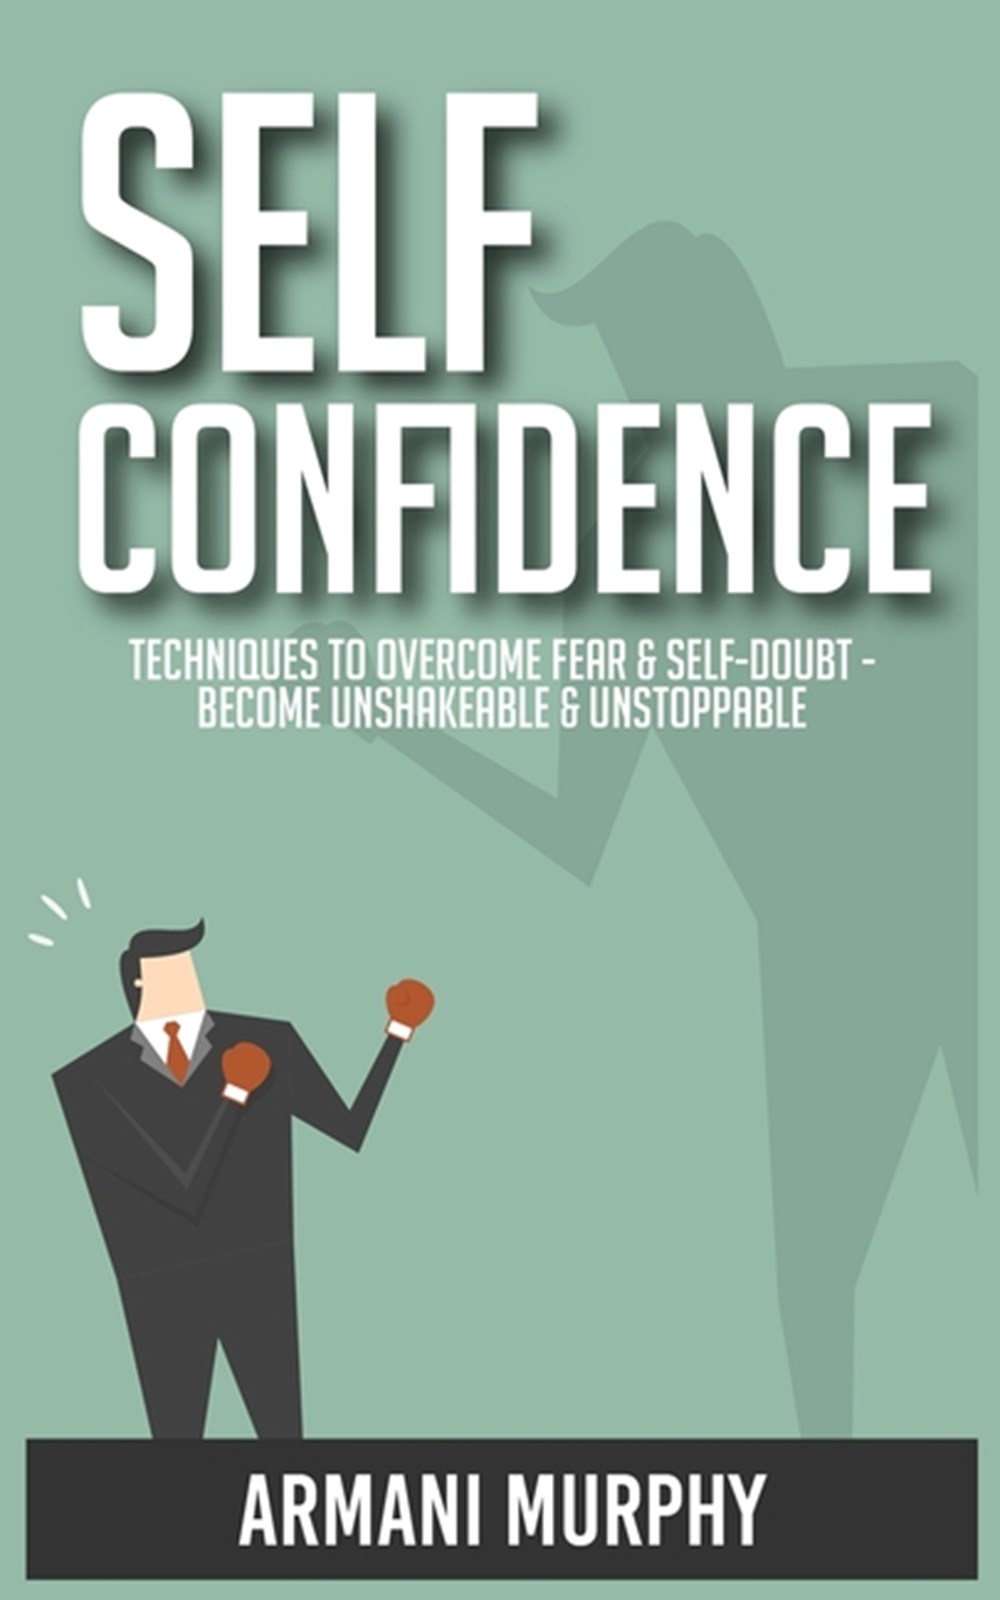 Self Confidence: Techniques to Overcome Fear & Self-Doubt - Become  Unshakeable & Unstoppable in Pape by Armani Murphy